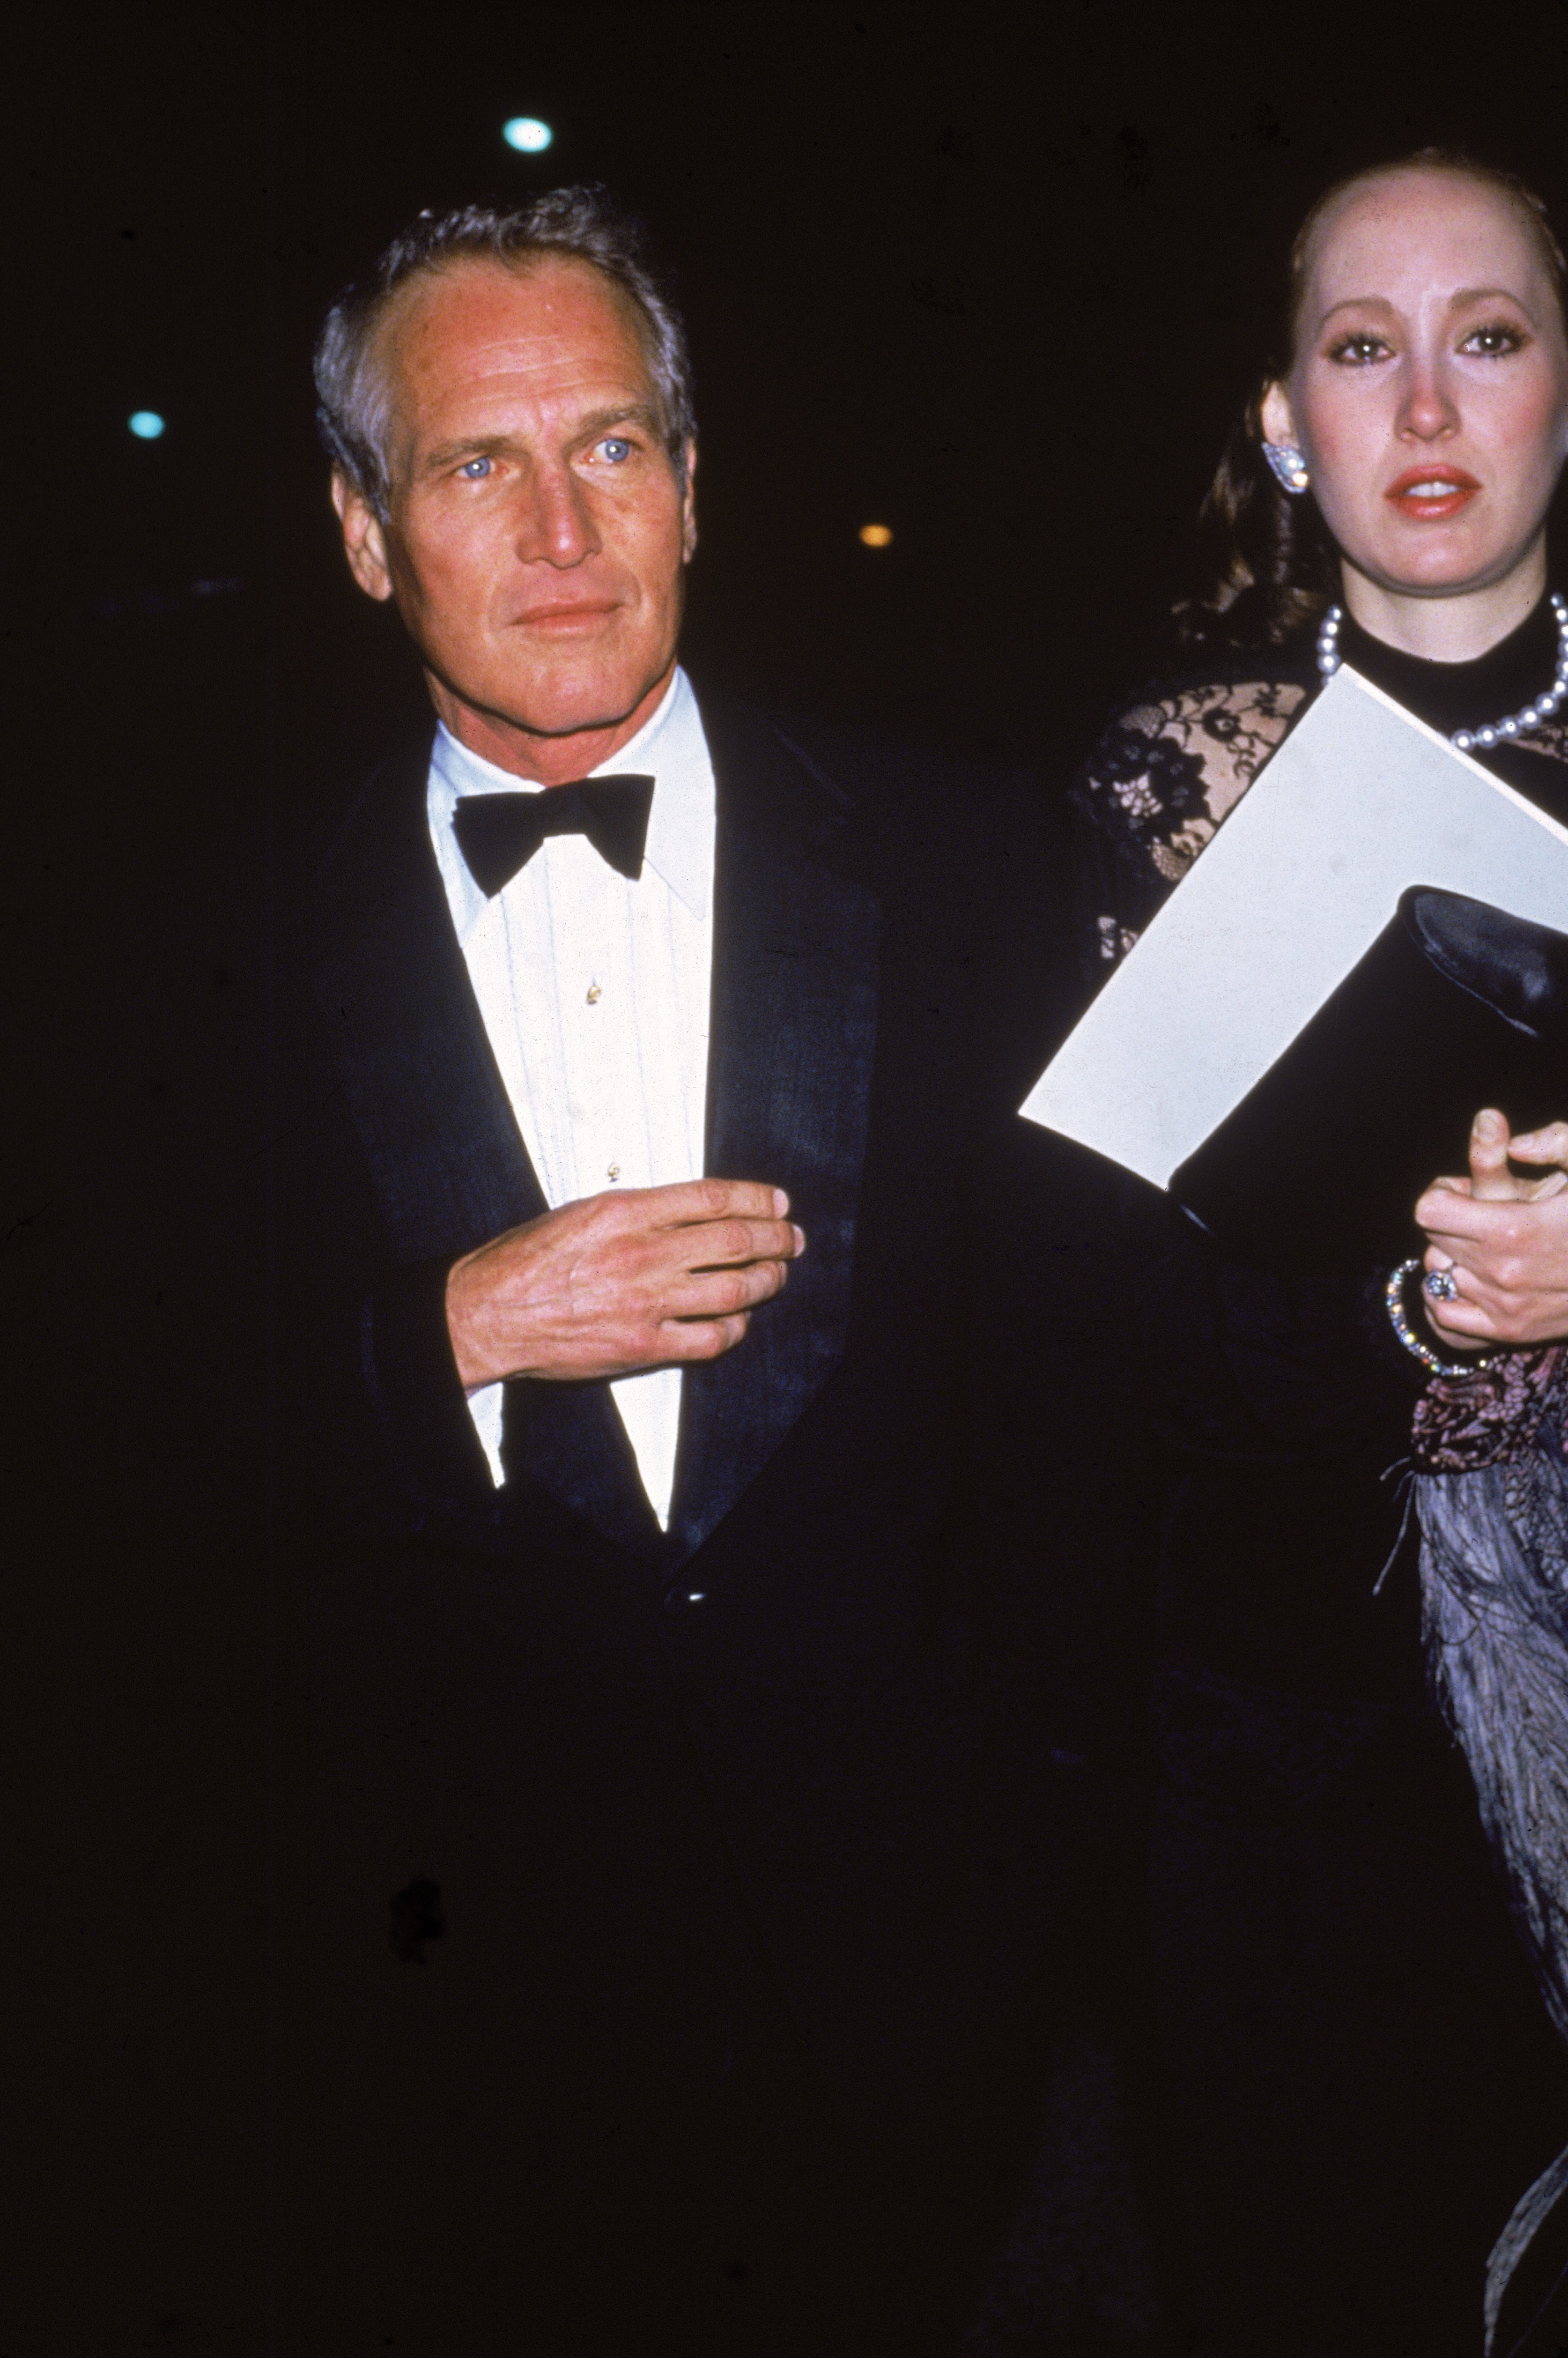 Paul Newman and his daughter, actress Susan Kendall Newman, arriving at the Dorothy Chandler Pavilion for the Academy Awards ceremony on April 11, 1983 in Los Angeles, California. | Source: Getty Images